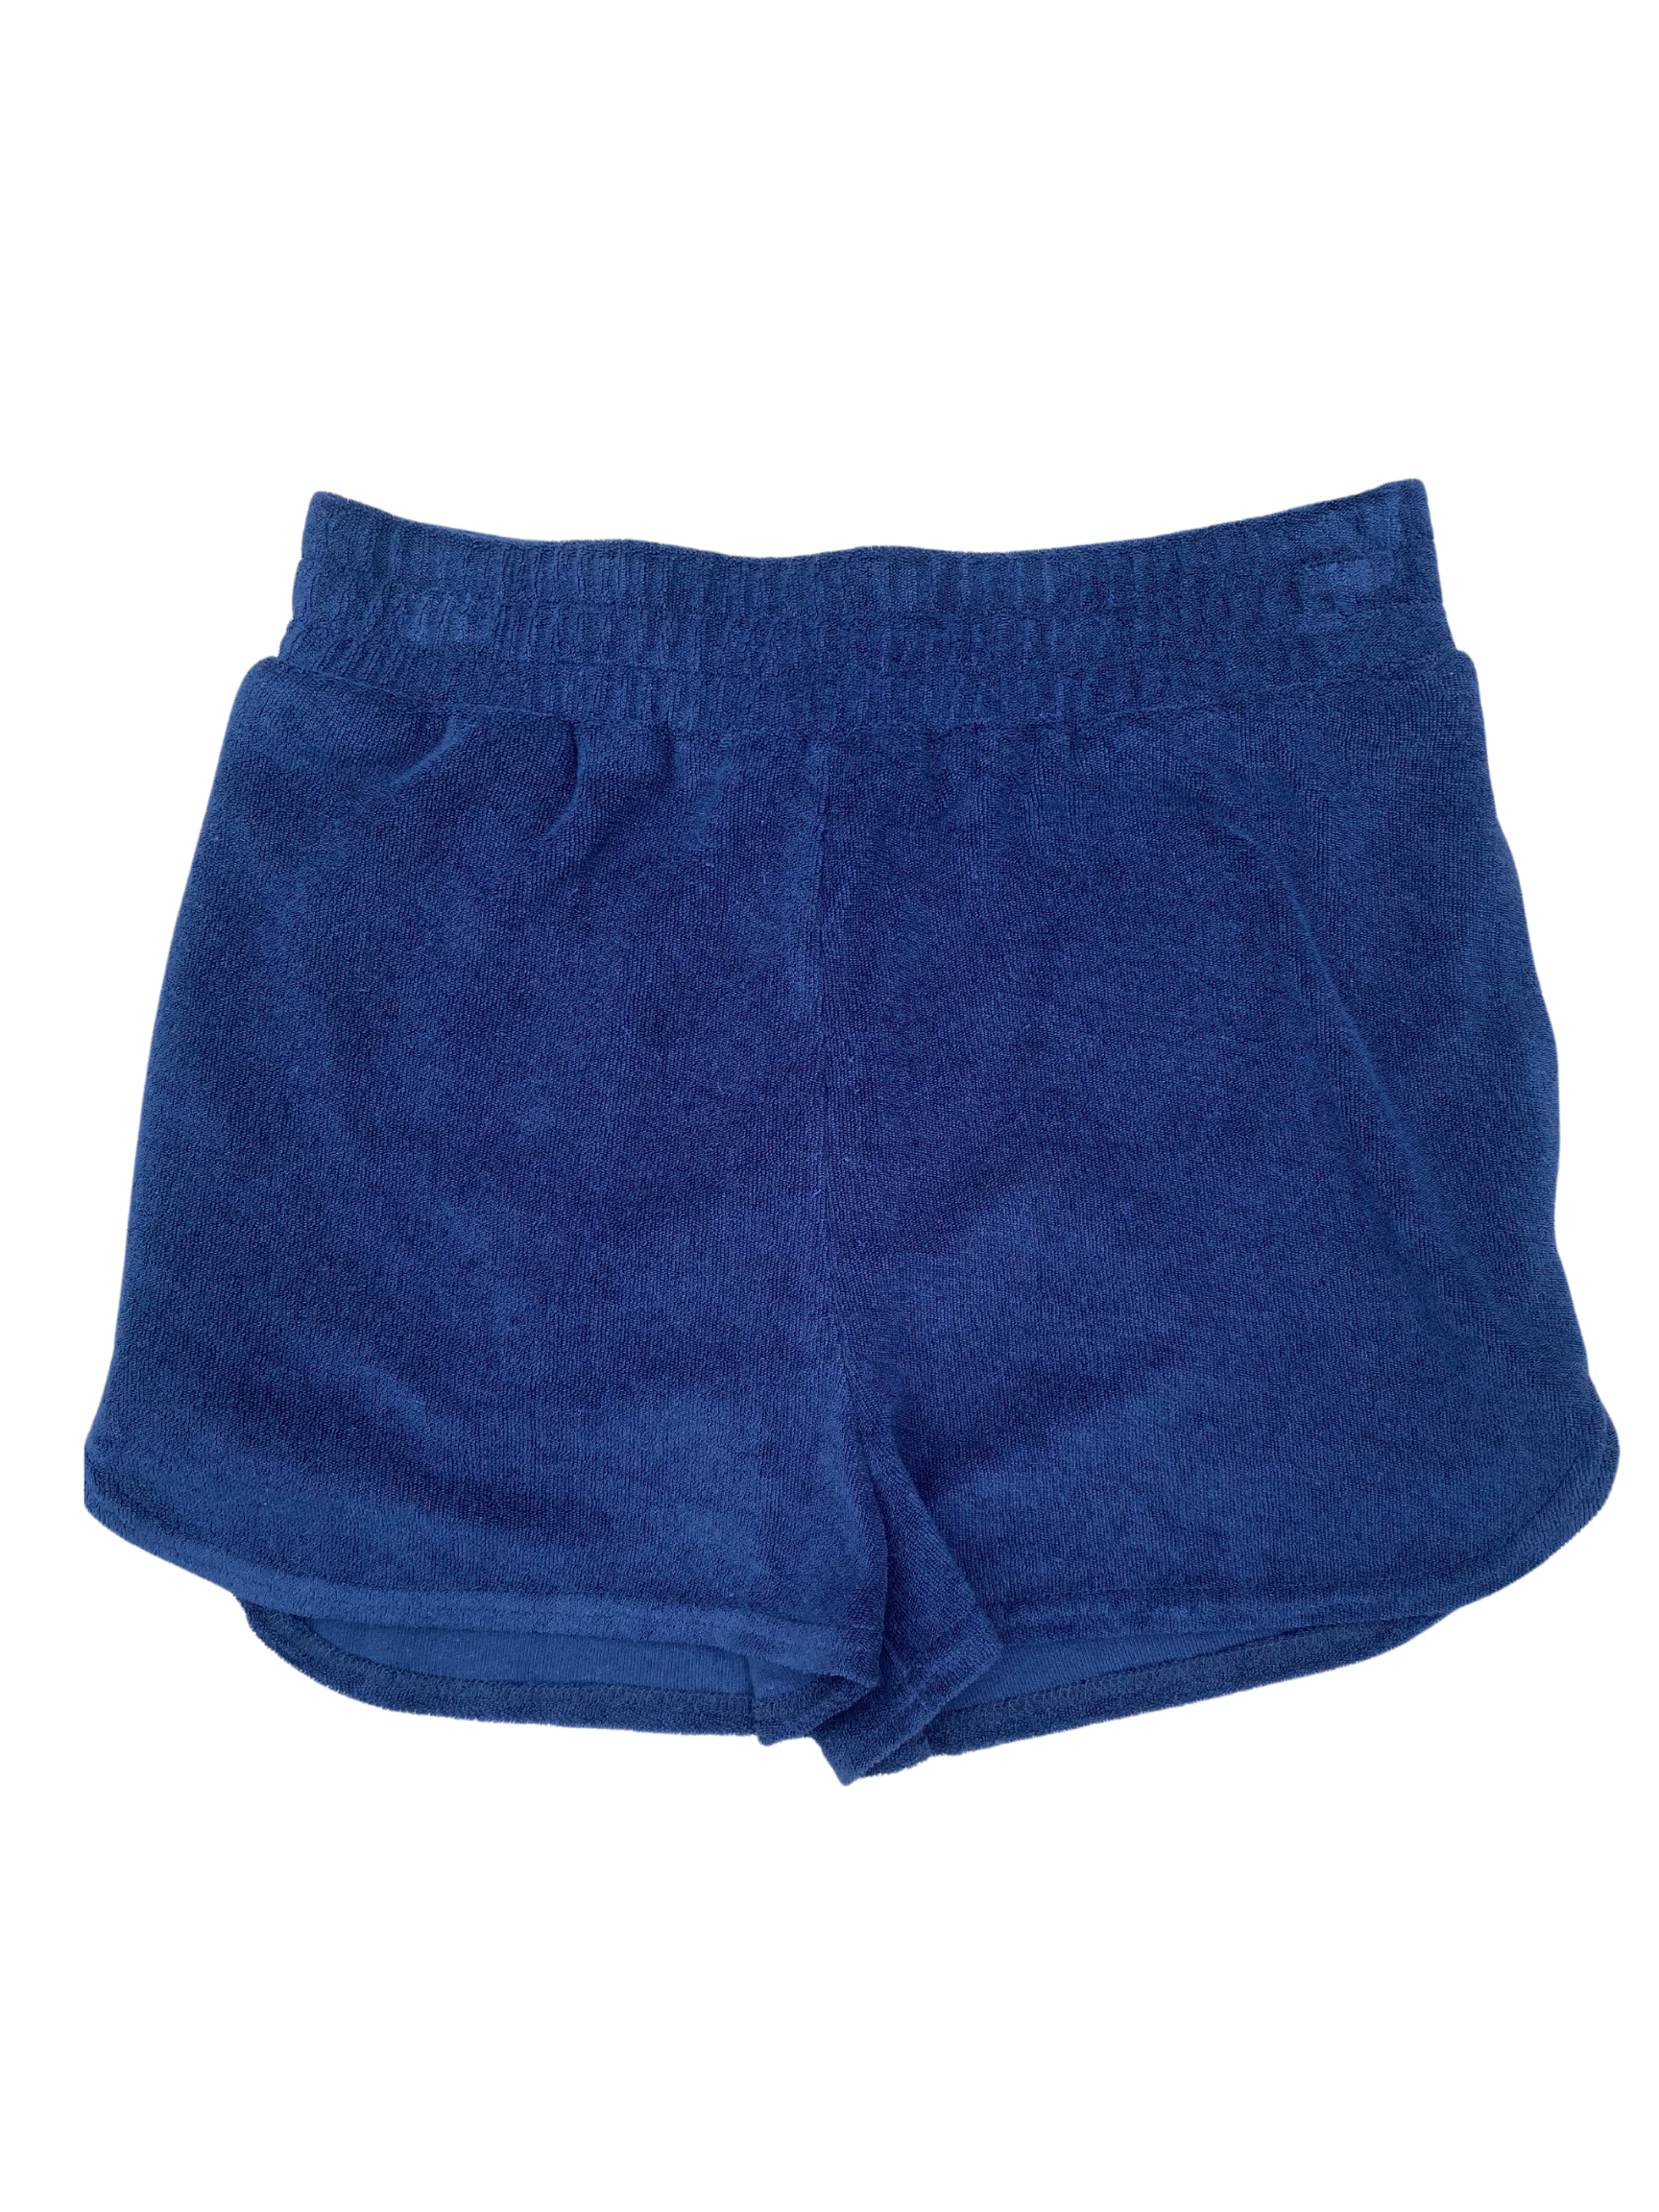 Navy Blue Terry Cloth Shorts with Pockets